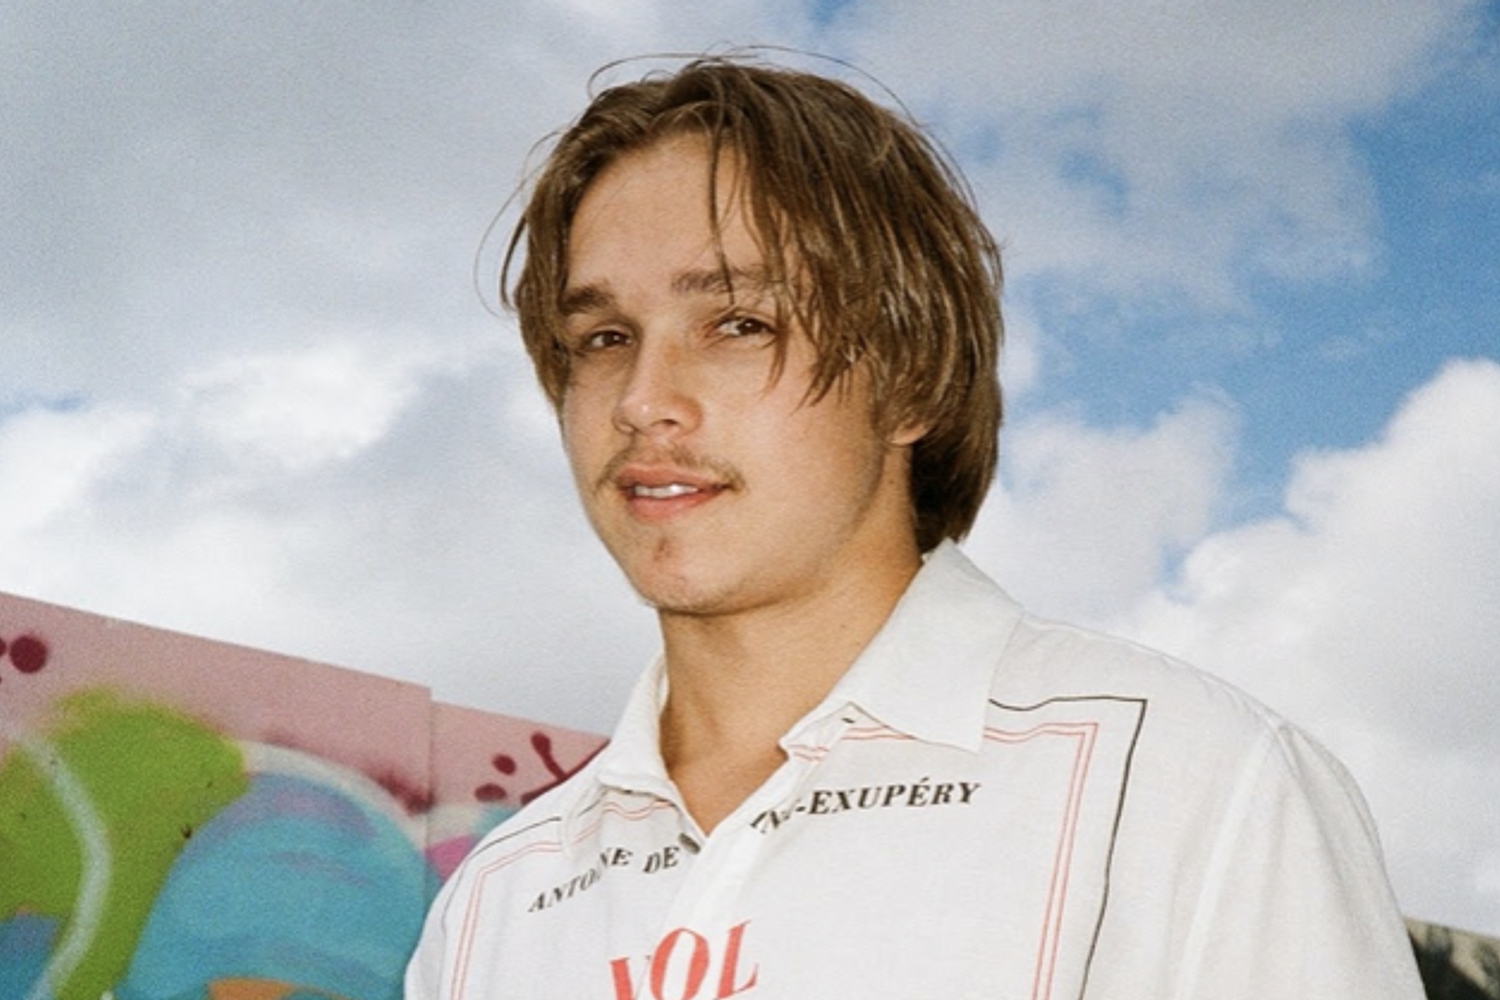 Oliver Malcolm offers up new track ‘Nevada 2003’